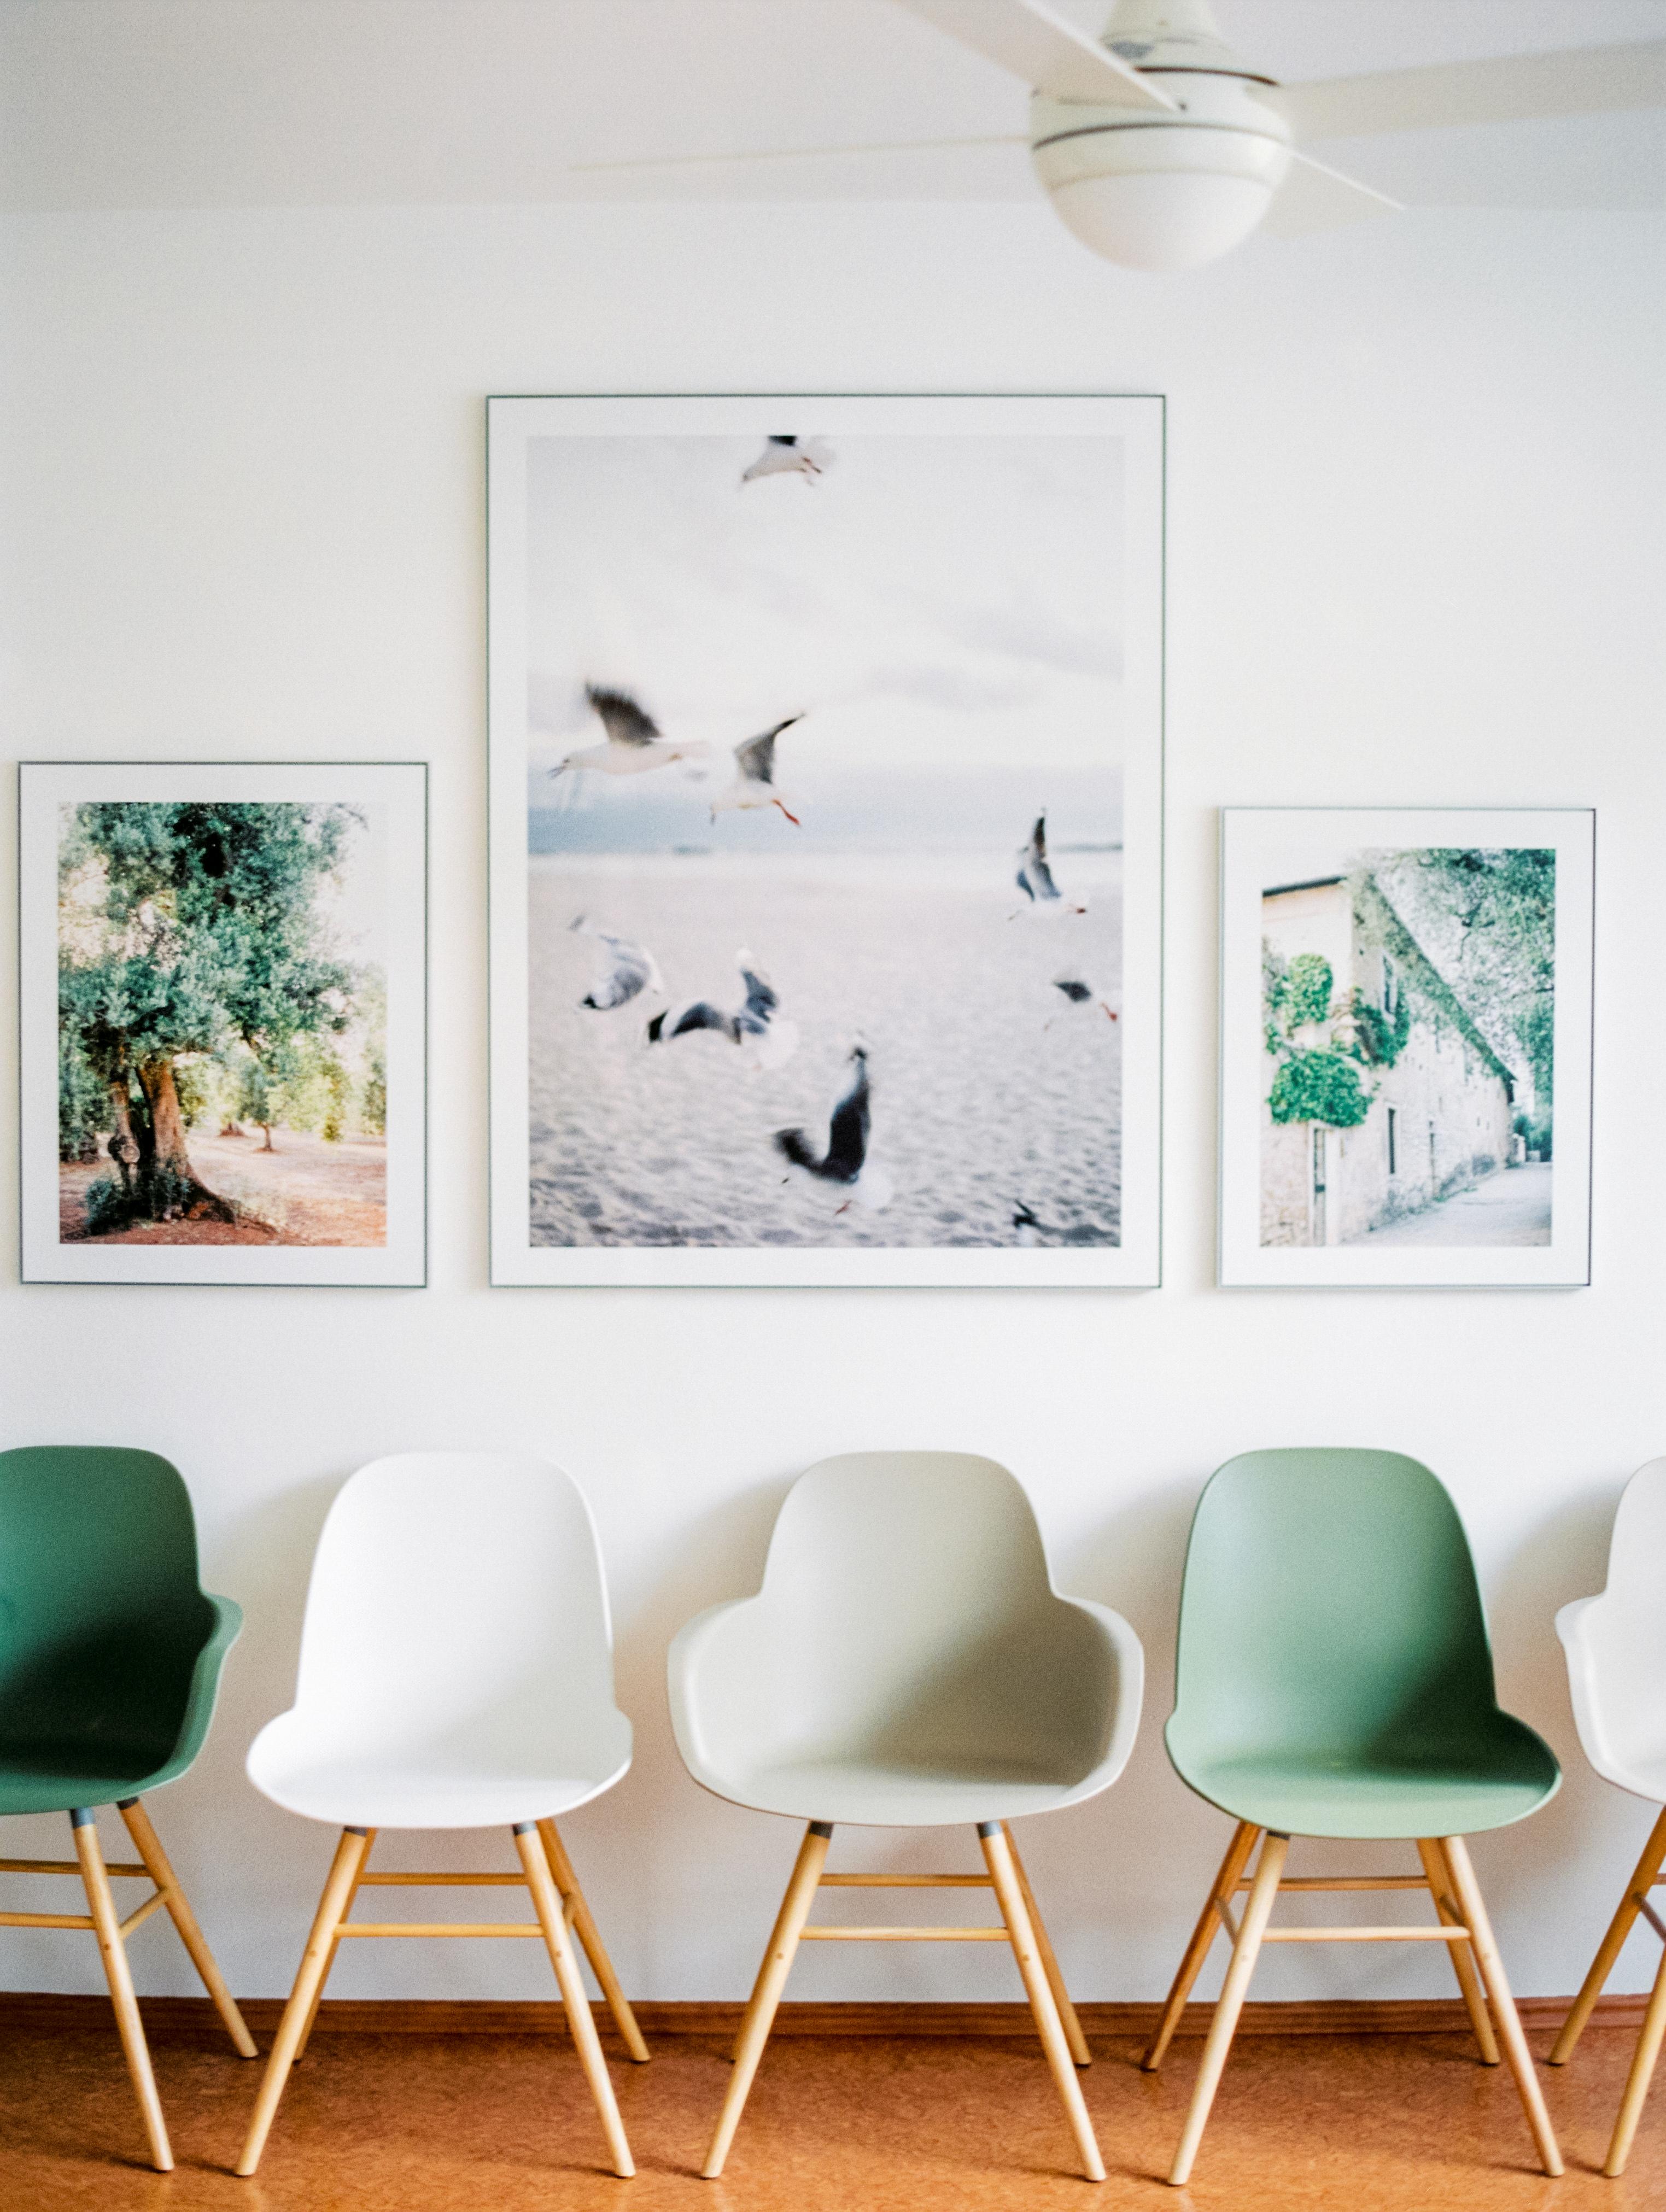 Seagulls - 21st Century Contemporary Landscape Color Photograph Print

This photograph is part of photographer and artist, Pia Clodi's collection of 75 prints for Artist Collective: Peaches and Mint.

Peaches and Mint is an Artist Collective,